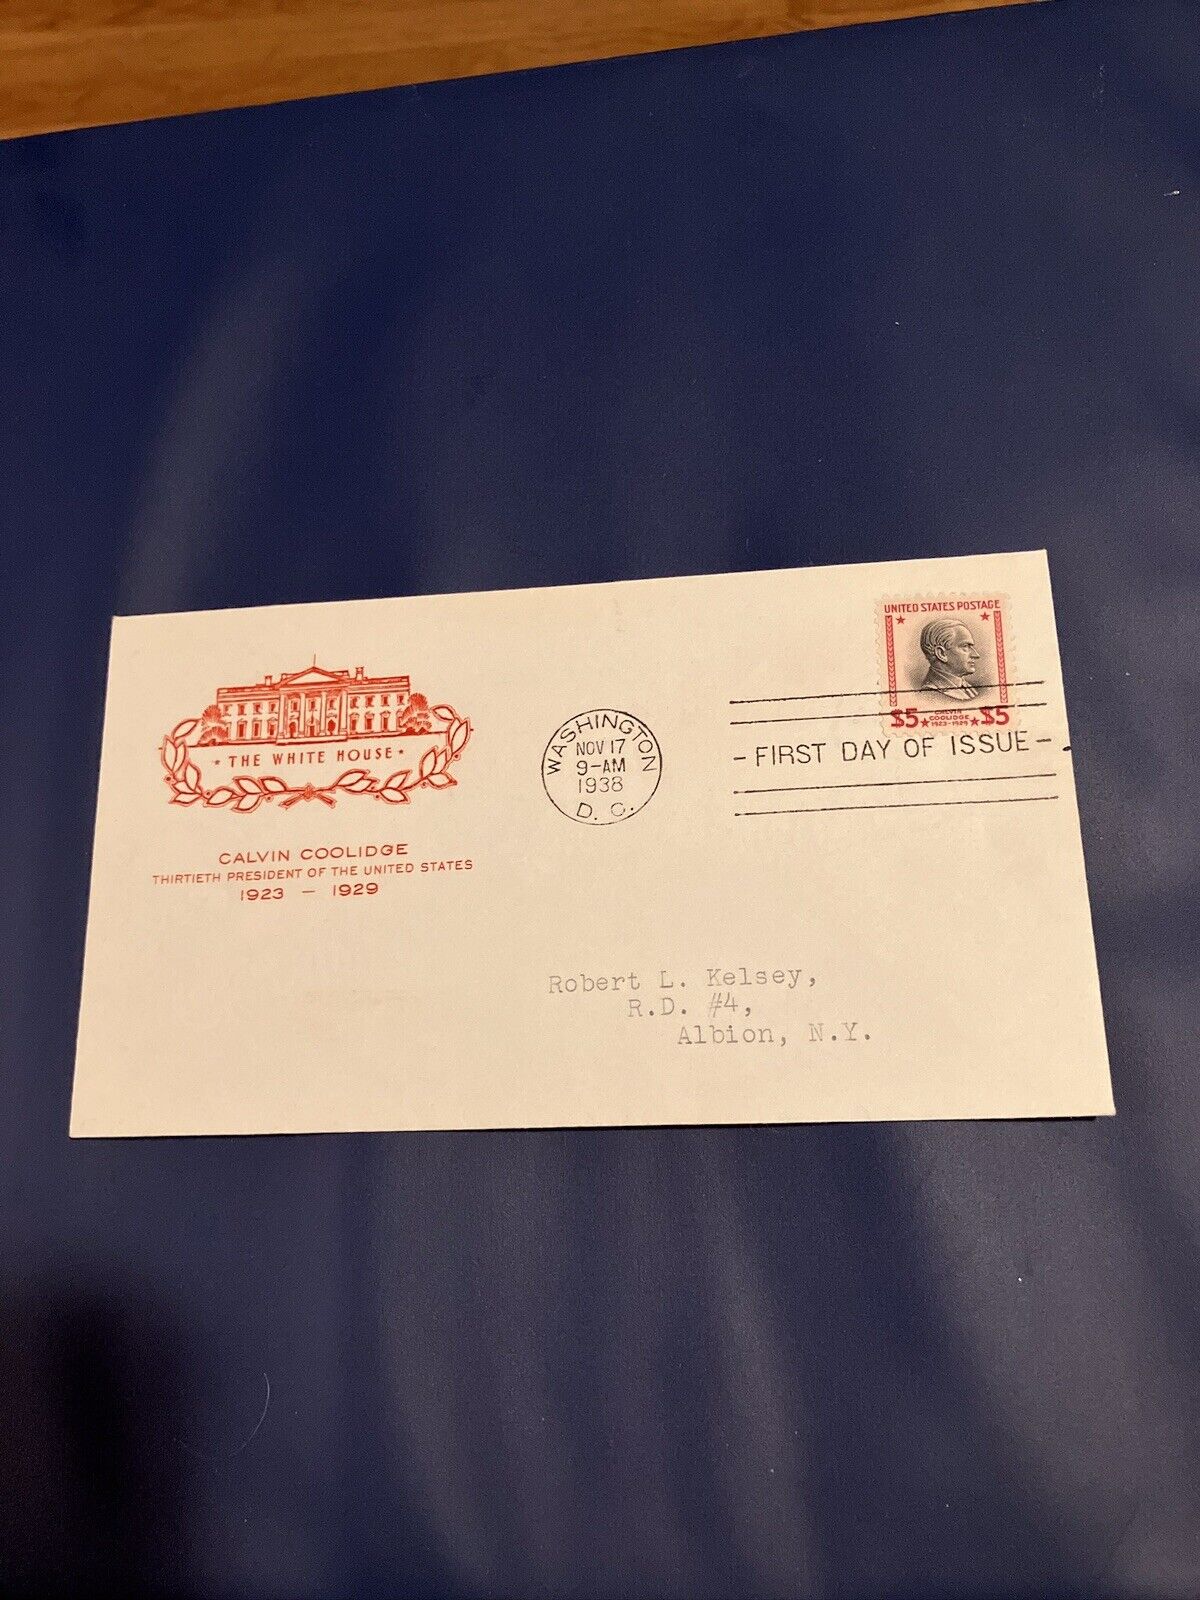 FDC Covers 1938 #834 Calvin Coolidge $5.00 First Day Cover With Farnam Cachet